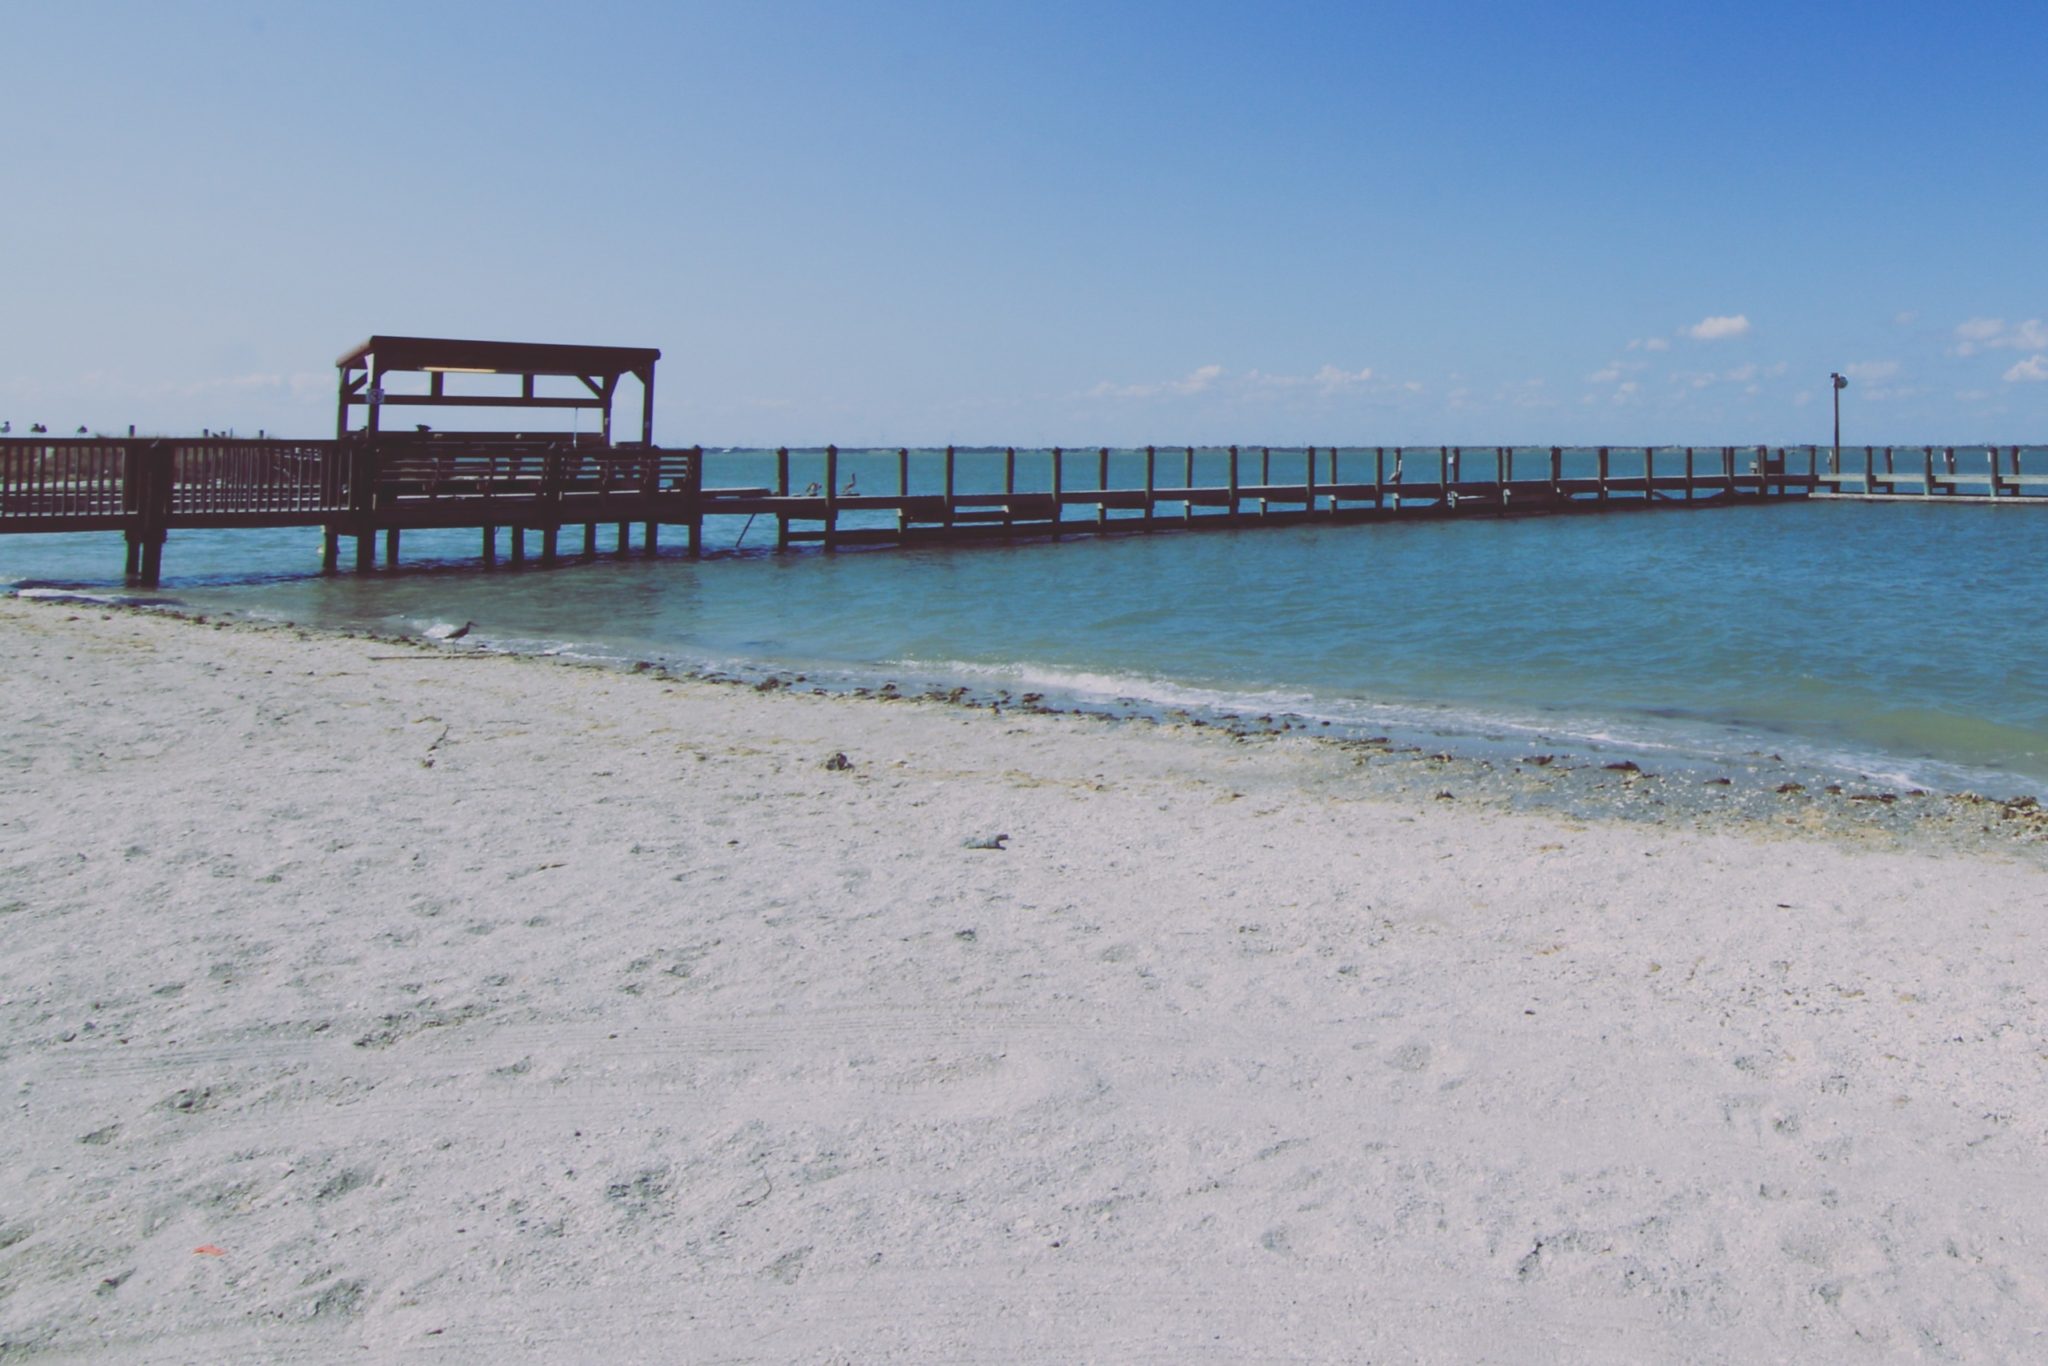 Walking along a beach pier is one of the many things to do in Mustang Island.